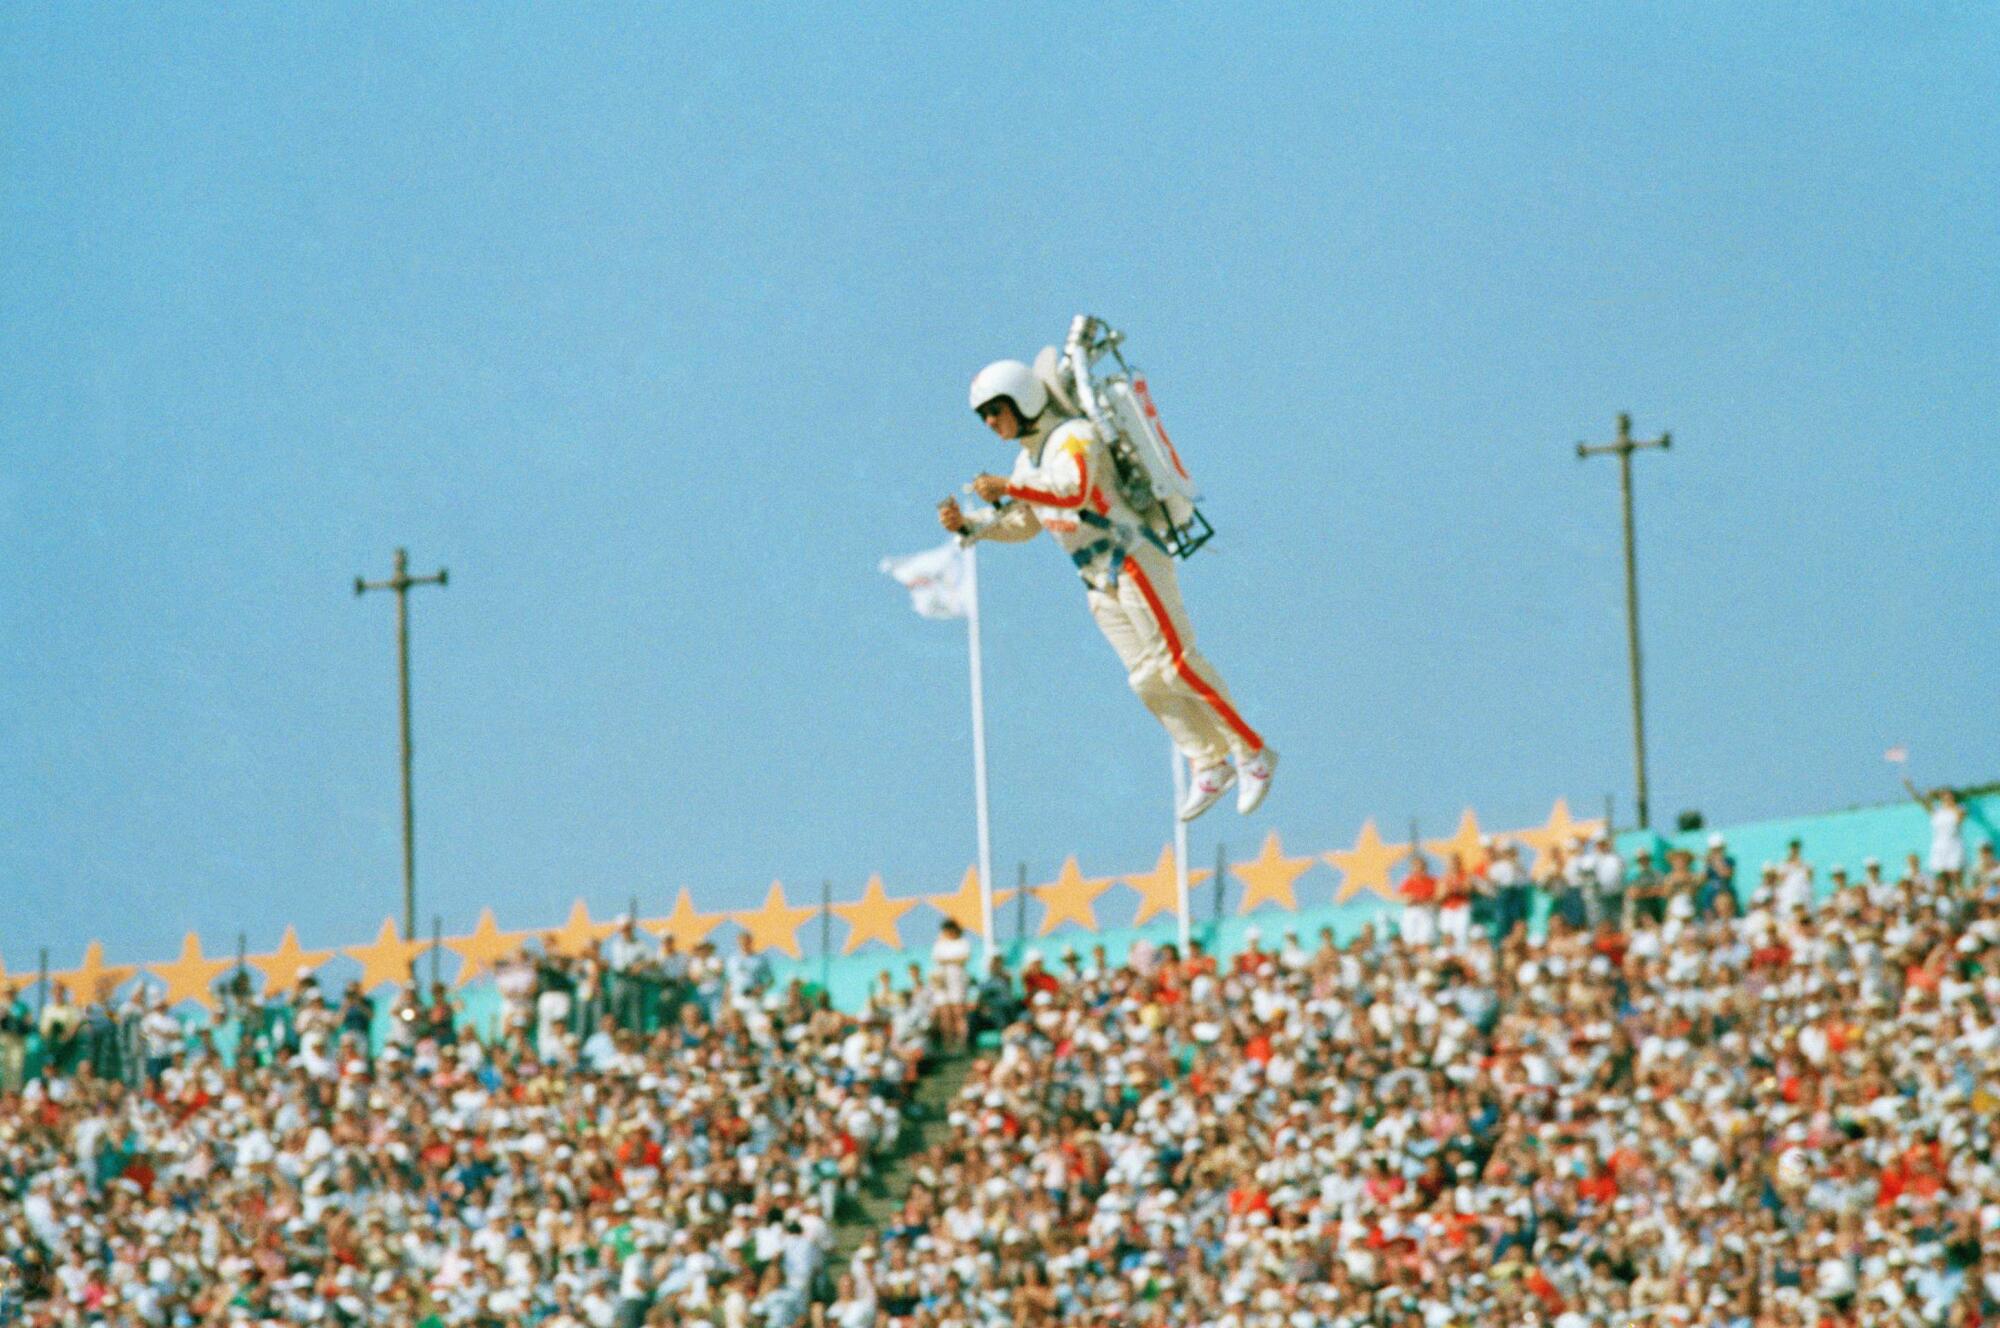 "Rocket Man" soars with the help of a jet pack during the welcoming of nations at the 1984 Olympics at the Coliseum.